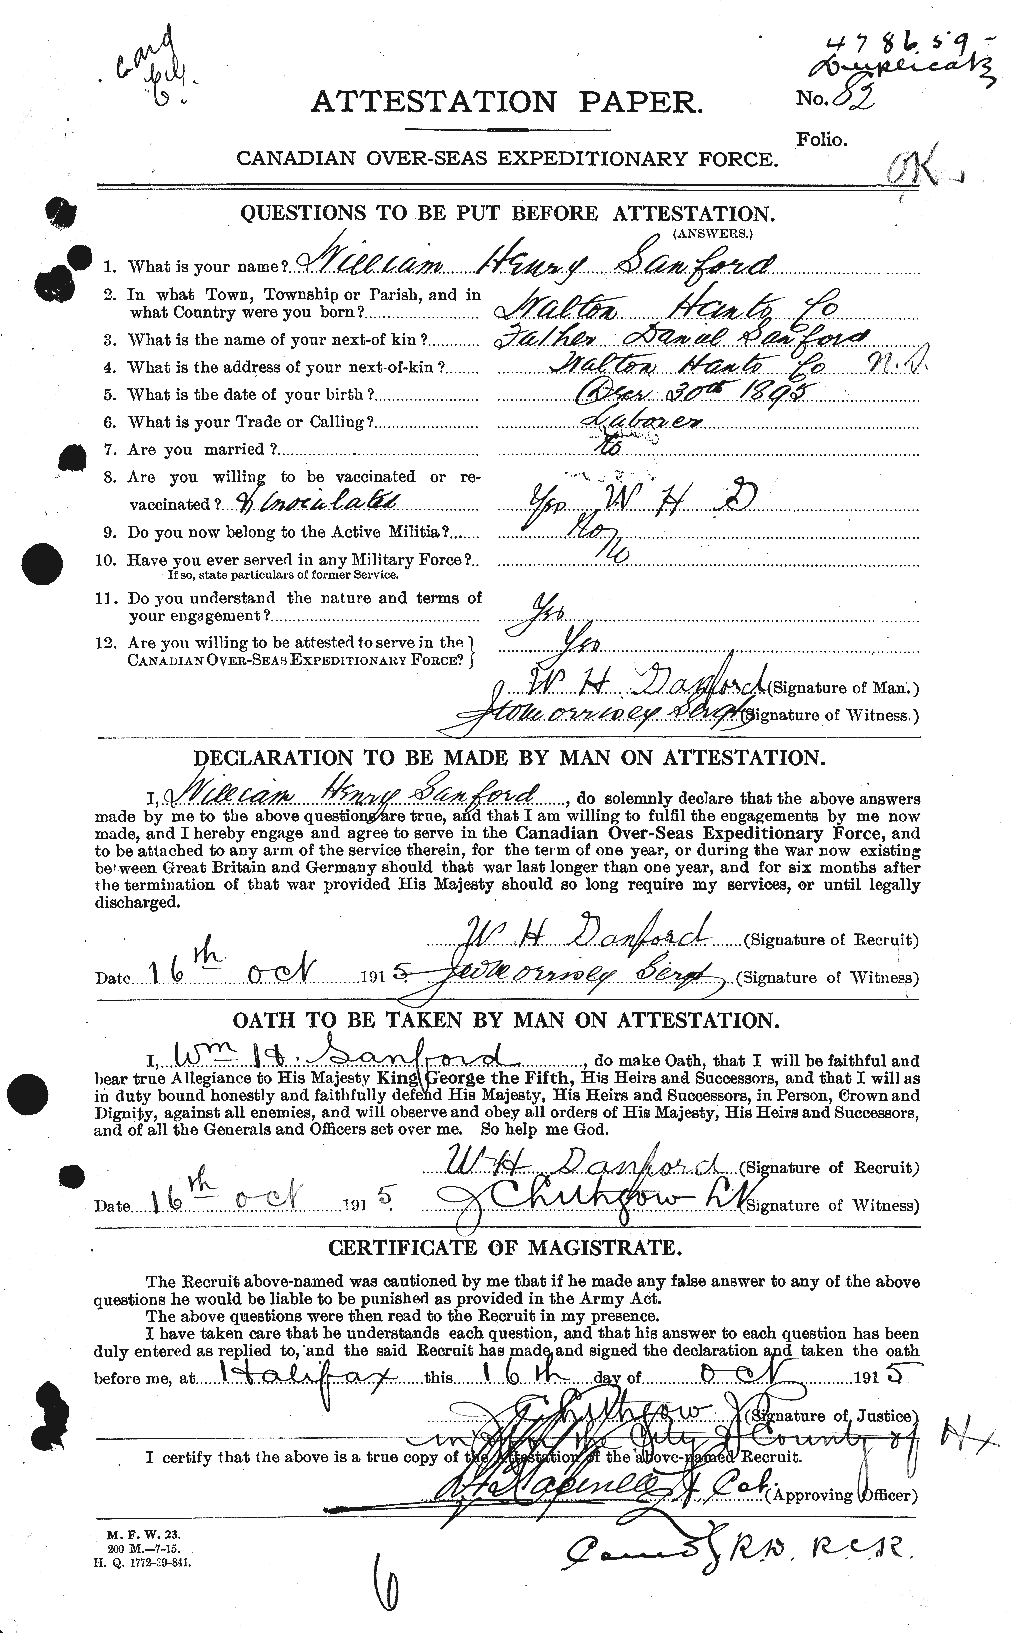 Personnel Records of the First World War - CEF 078248a